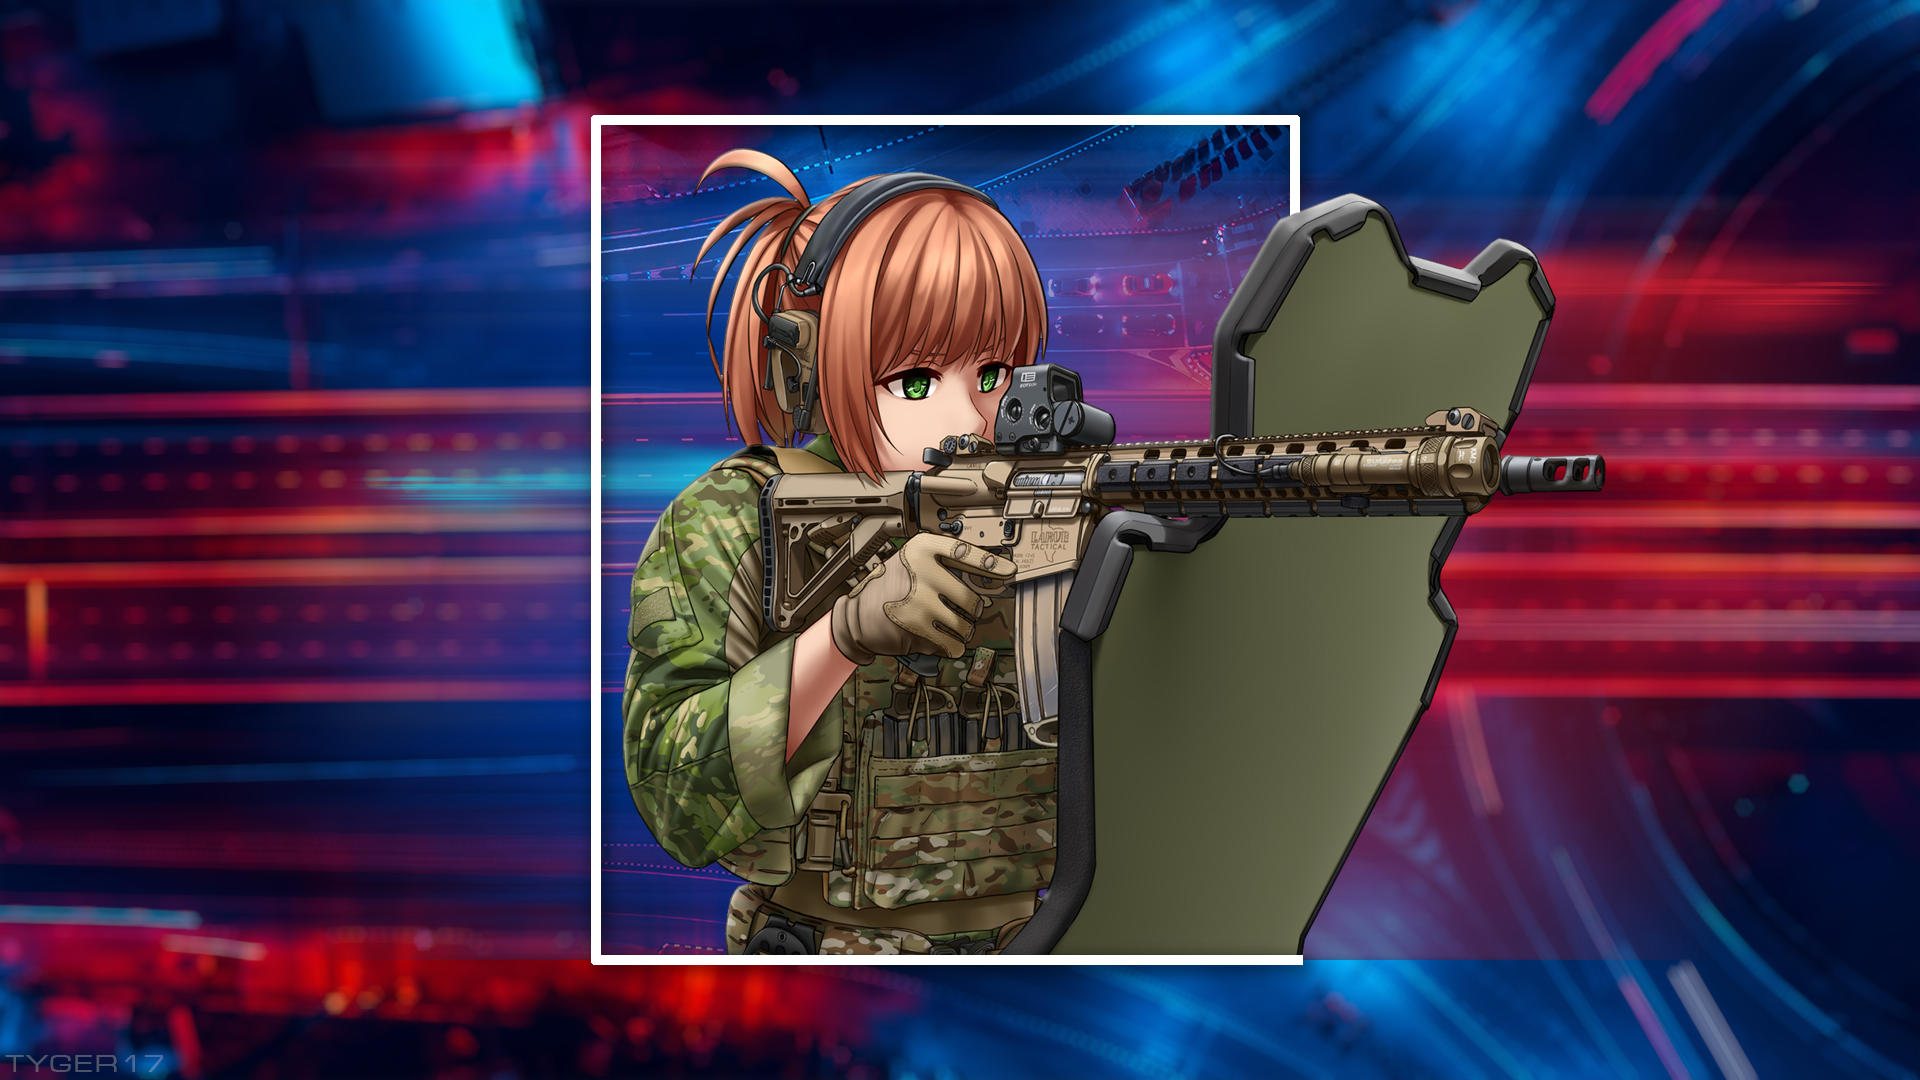 Picture In Picture Anime Girls With Guns Police SWAT Military Anime Girls 1920x1080